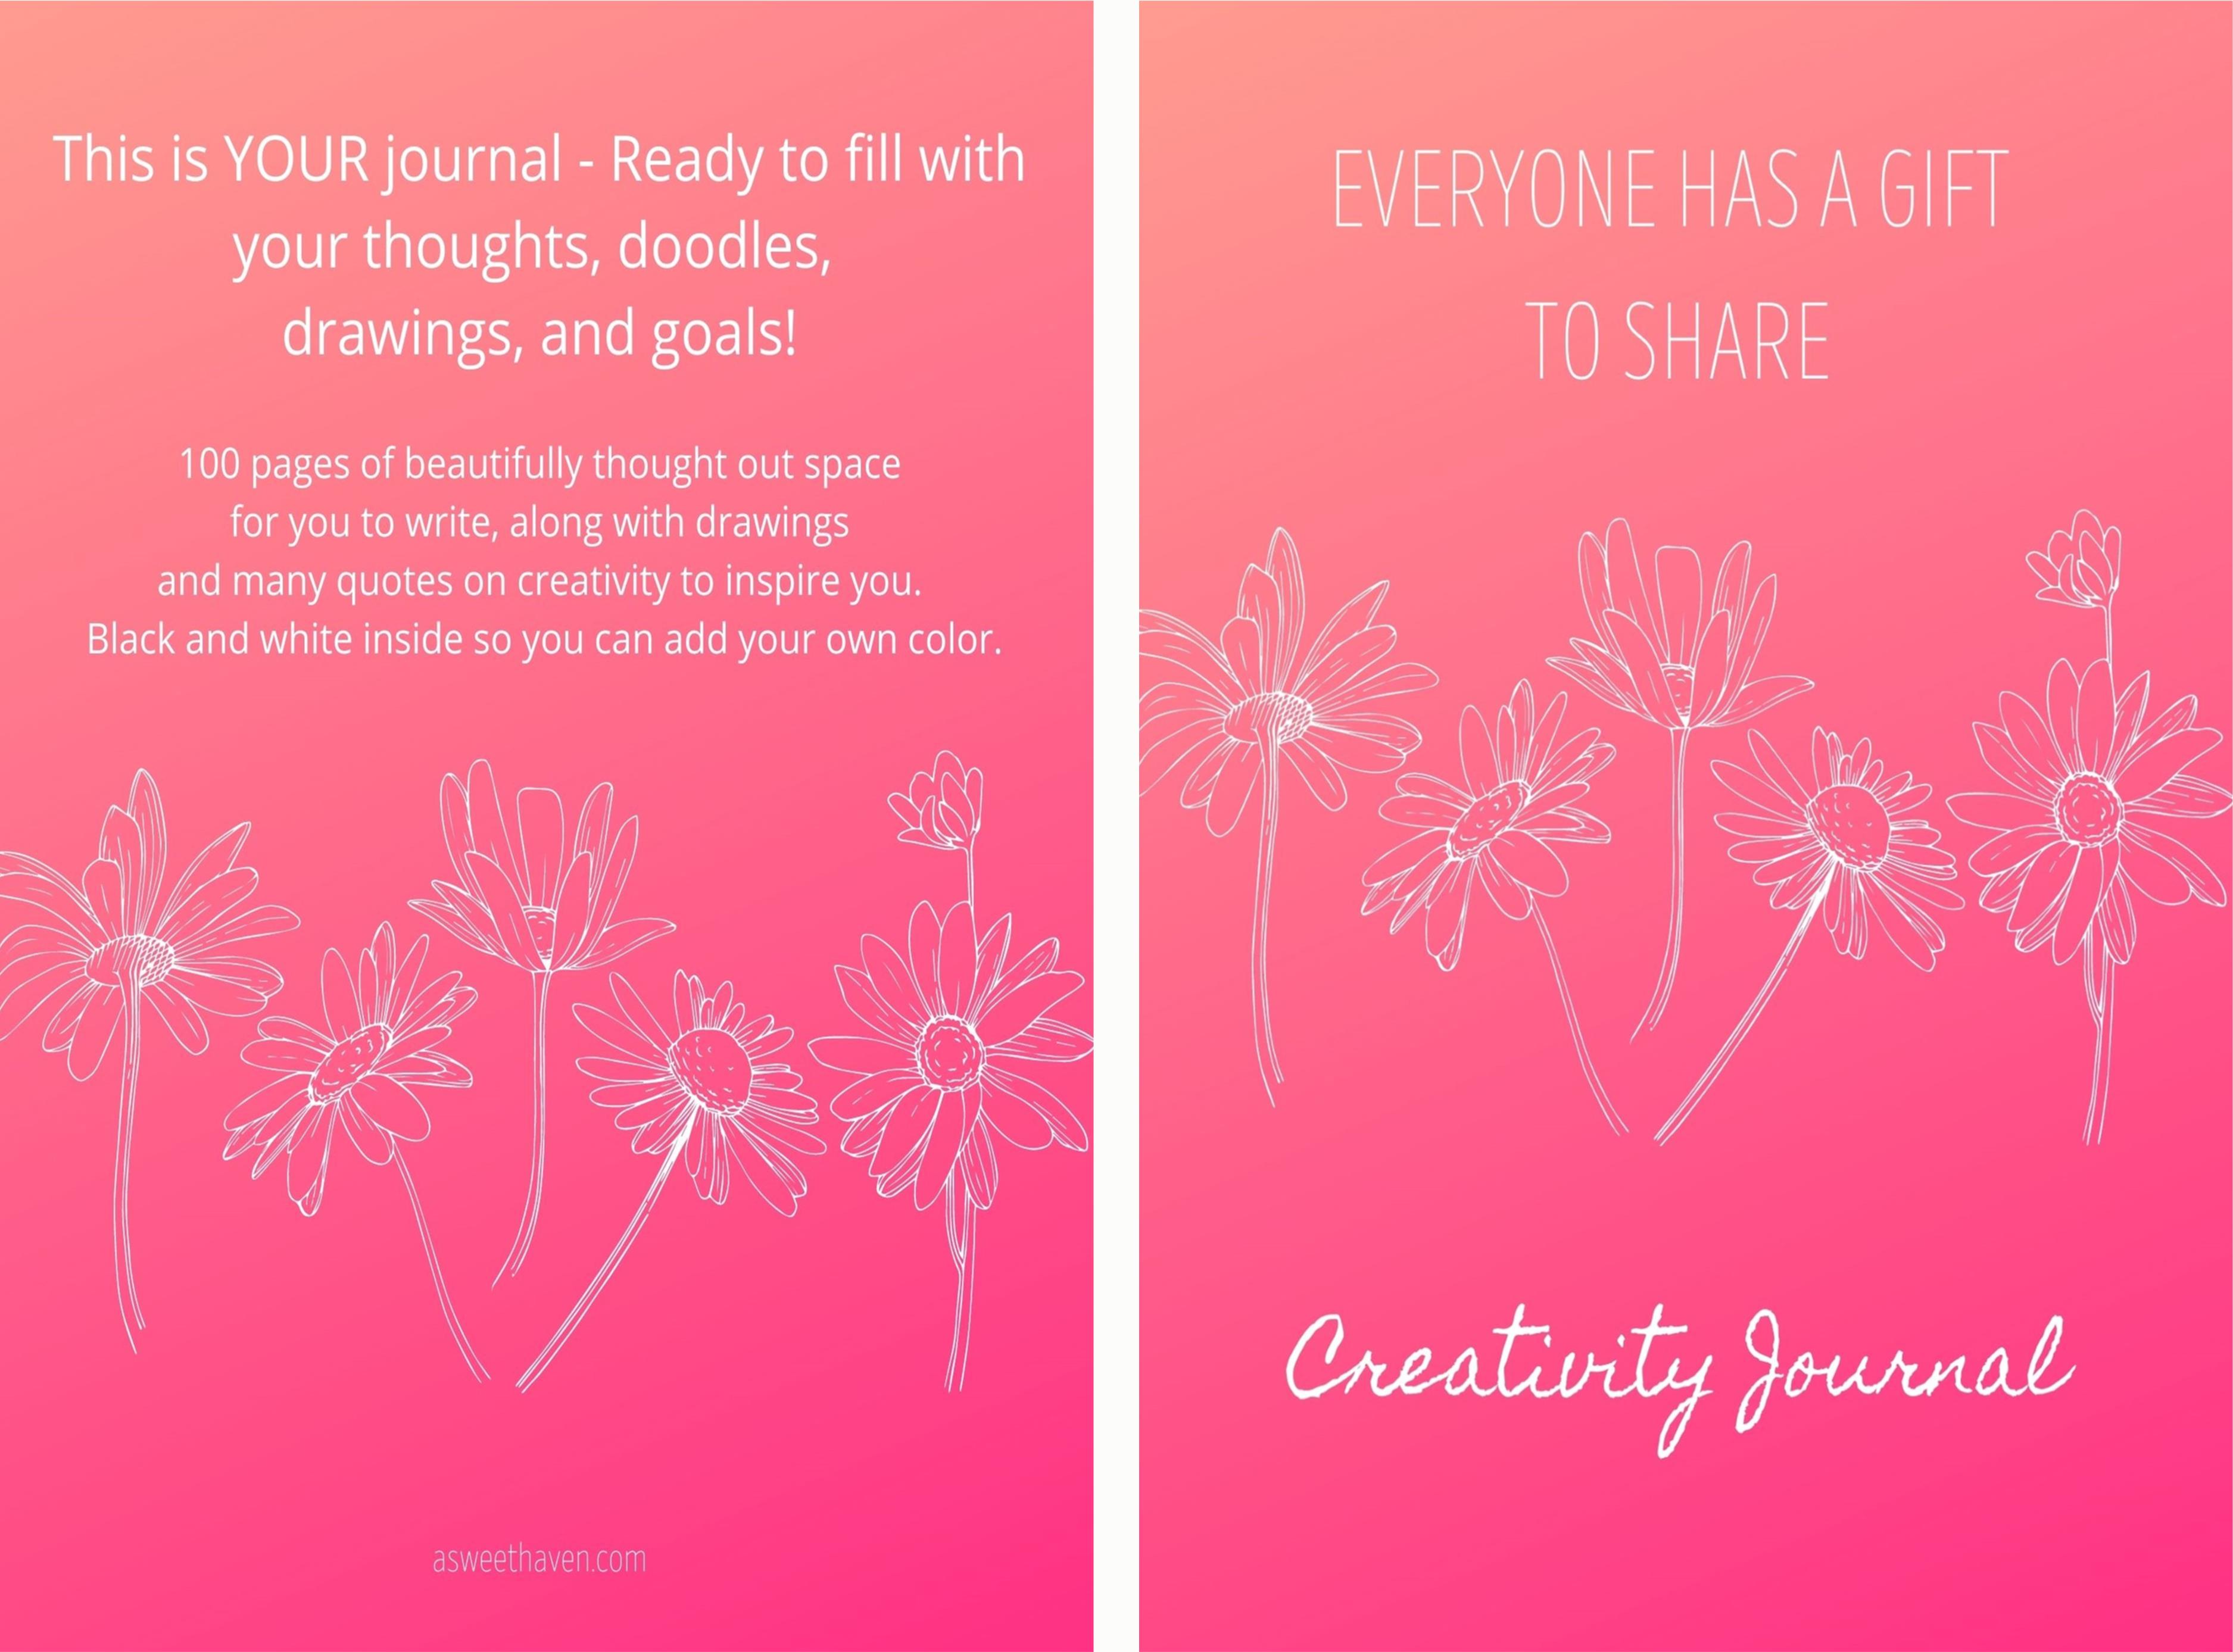 Creativity Journal cover image